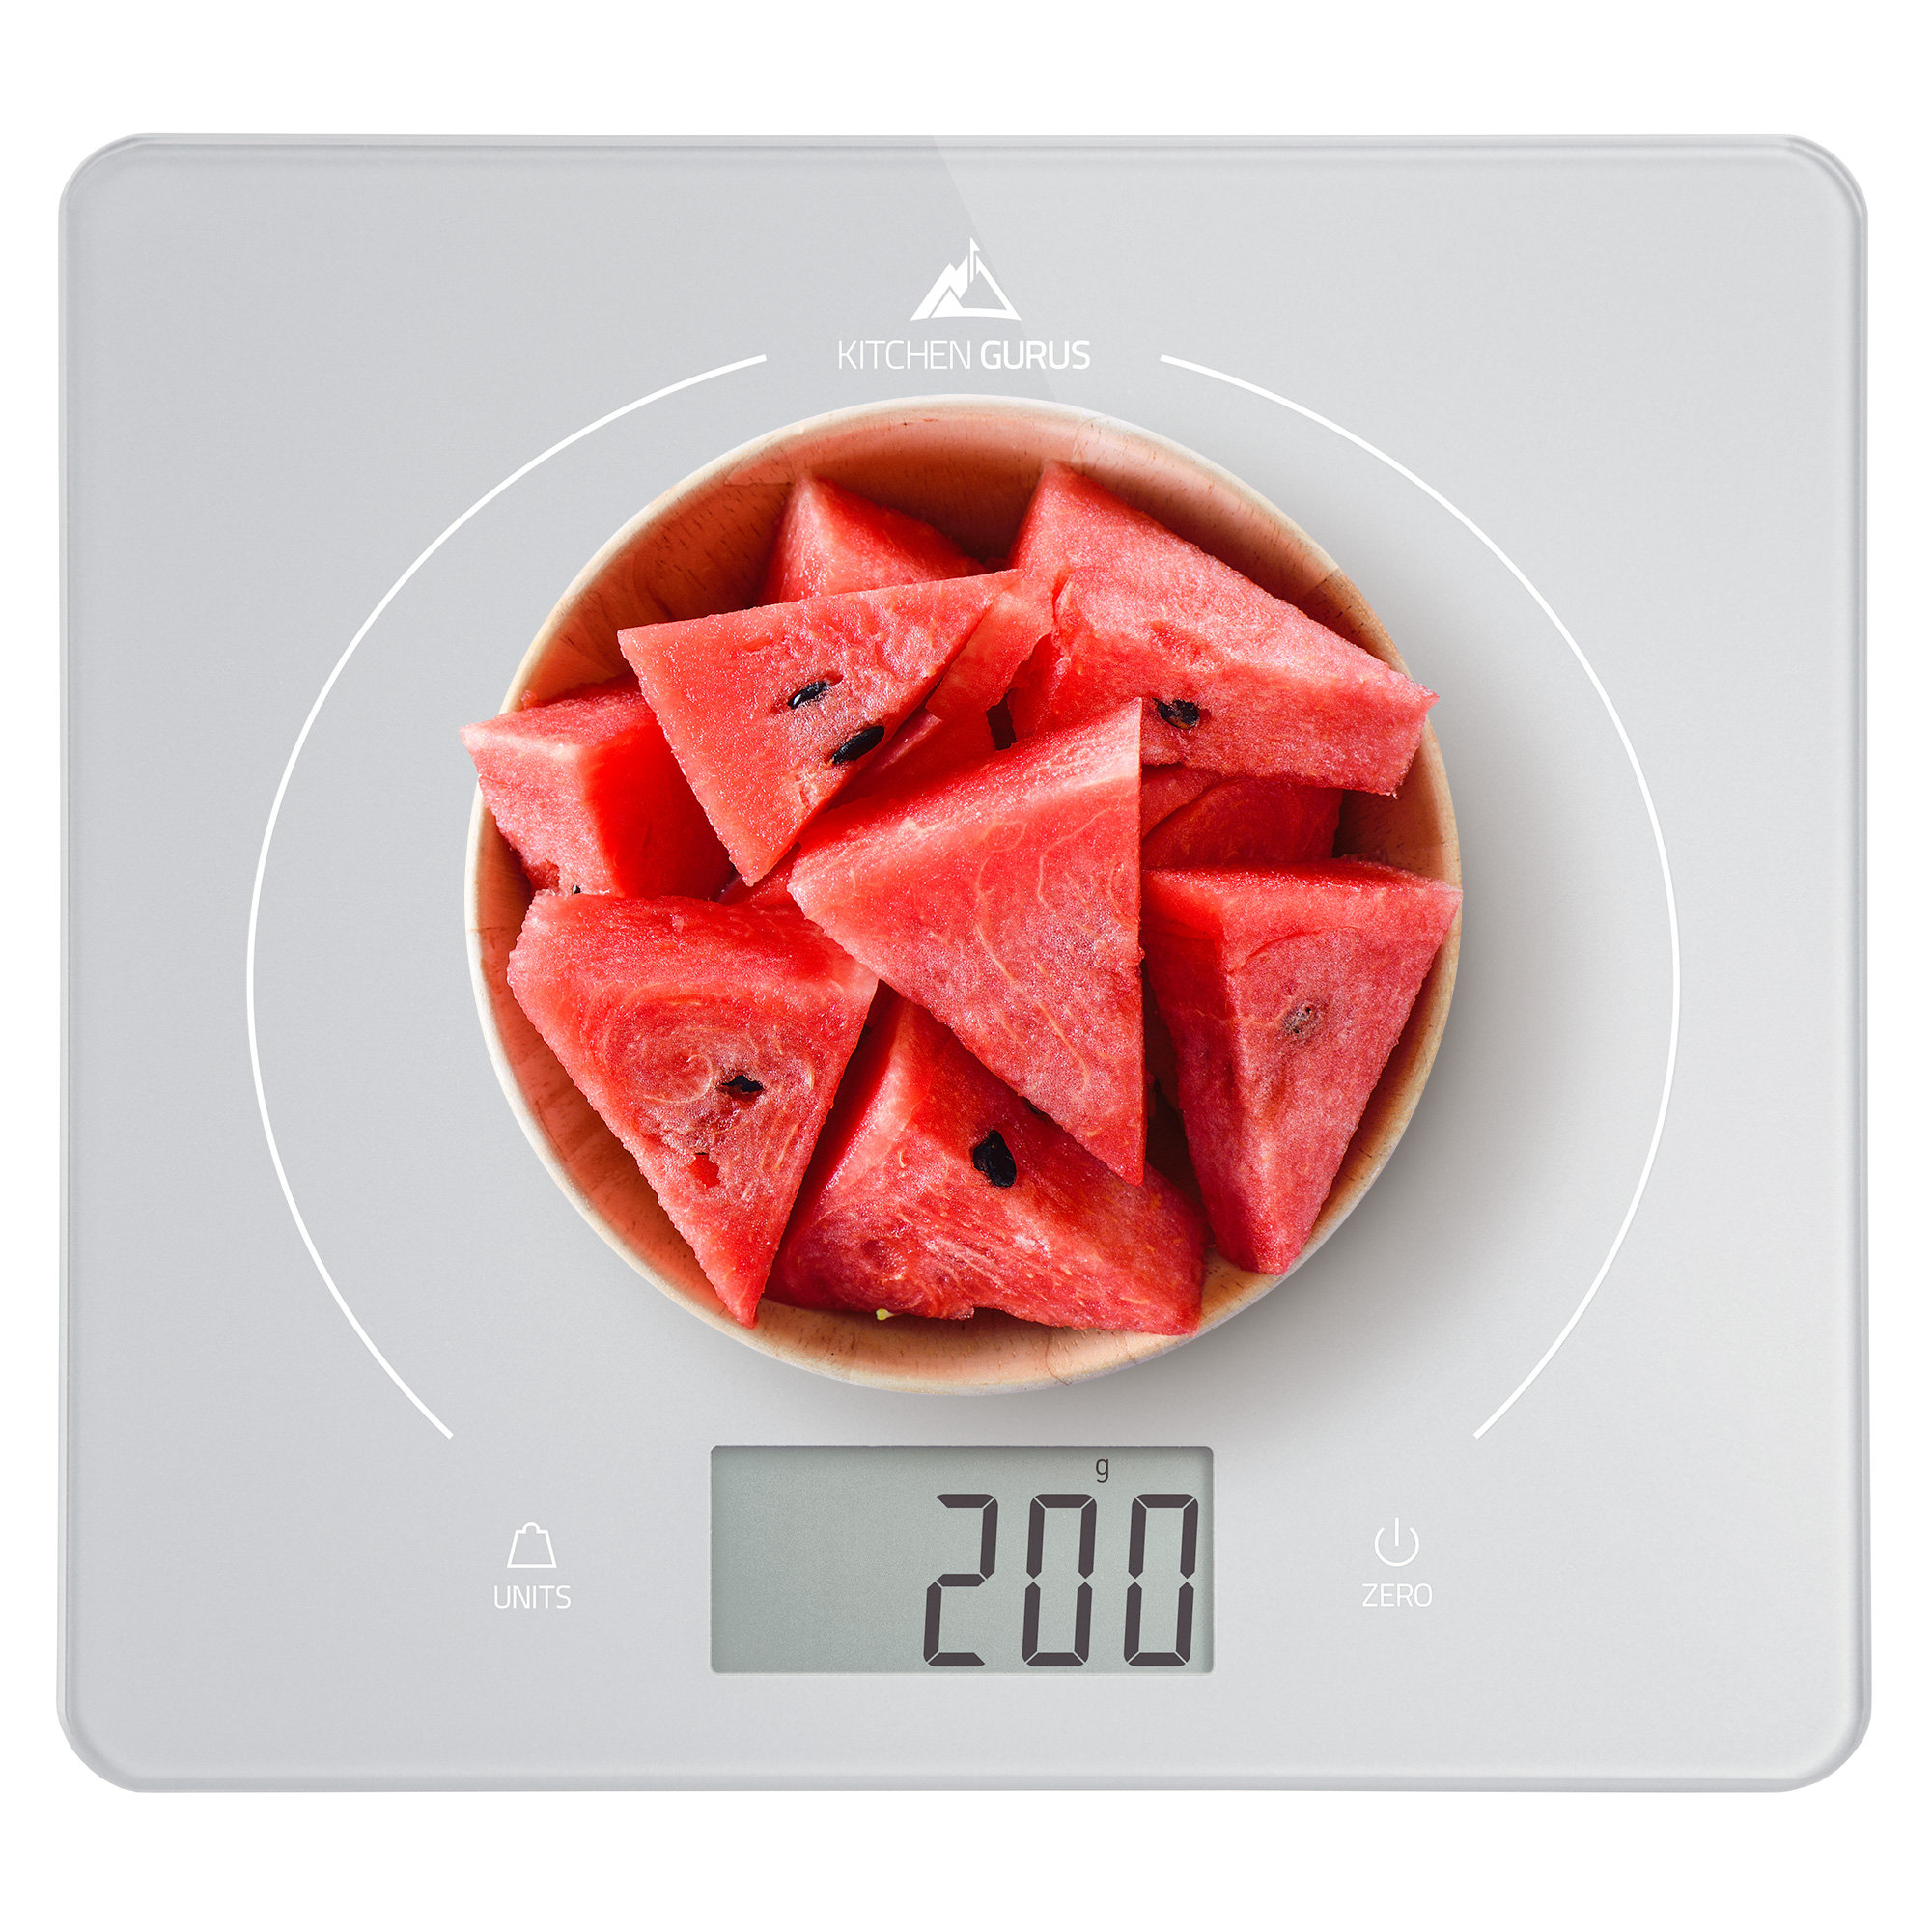 Digital Kitchen Food Scale - LCD Display Weight in Grams, Kilograms,  Ounces, Fl Ounces, Milliliters, and Pounds Perfect for Precise  Measurements